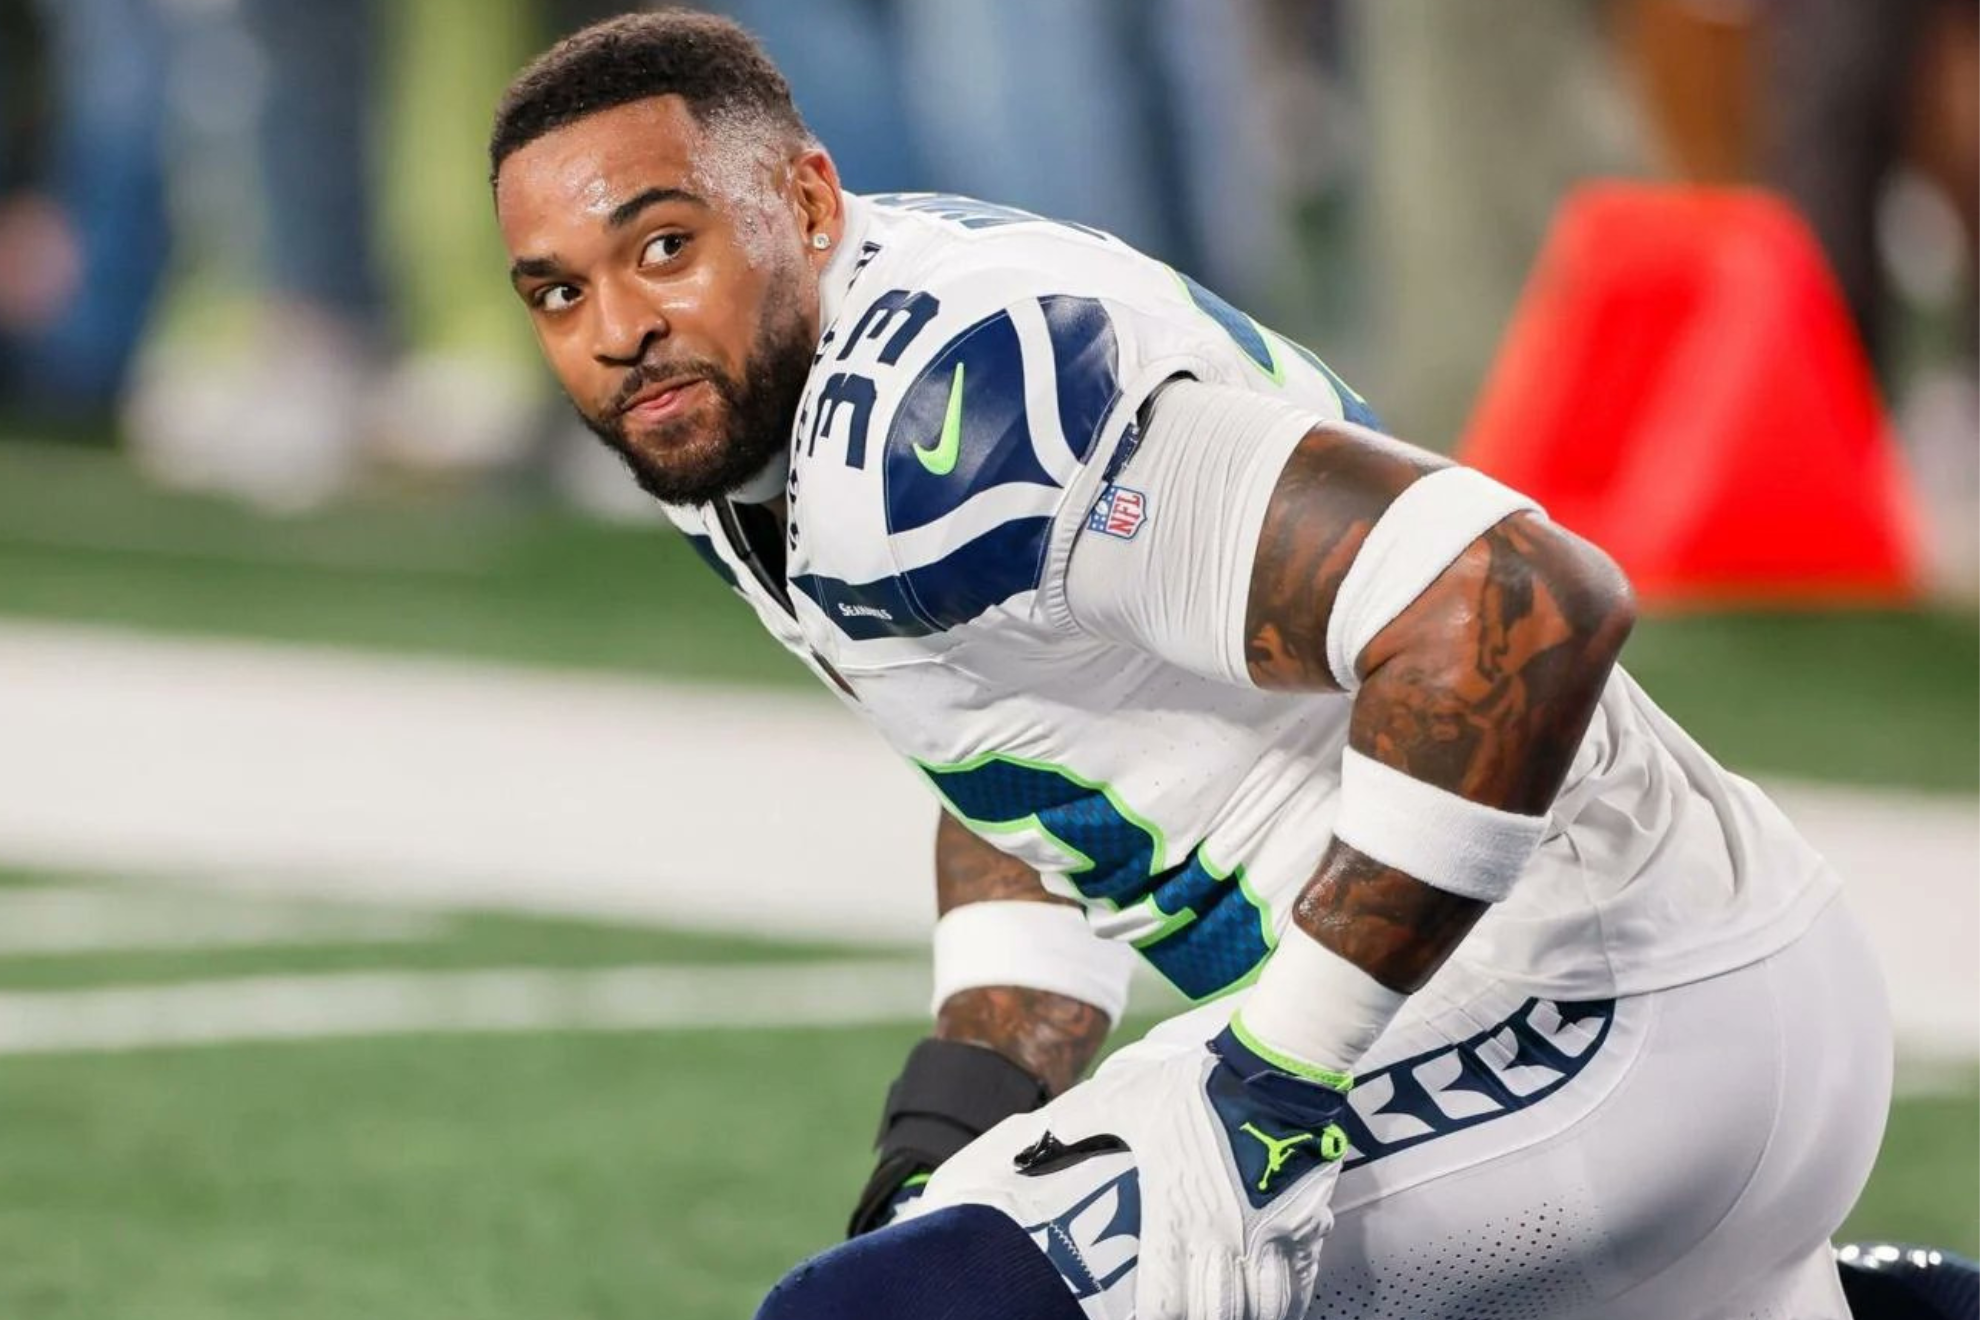 Adams has played only 27 games for the Seahawks since his 2020 arrival.